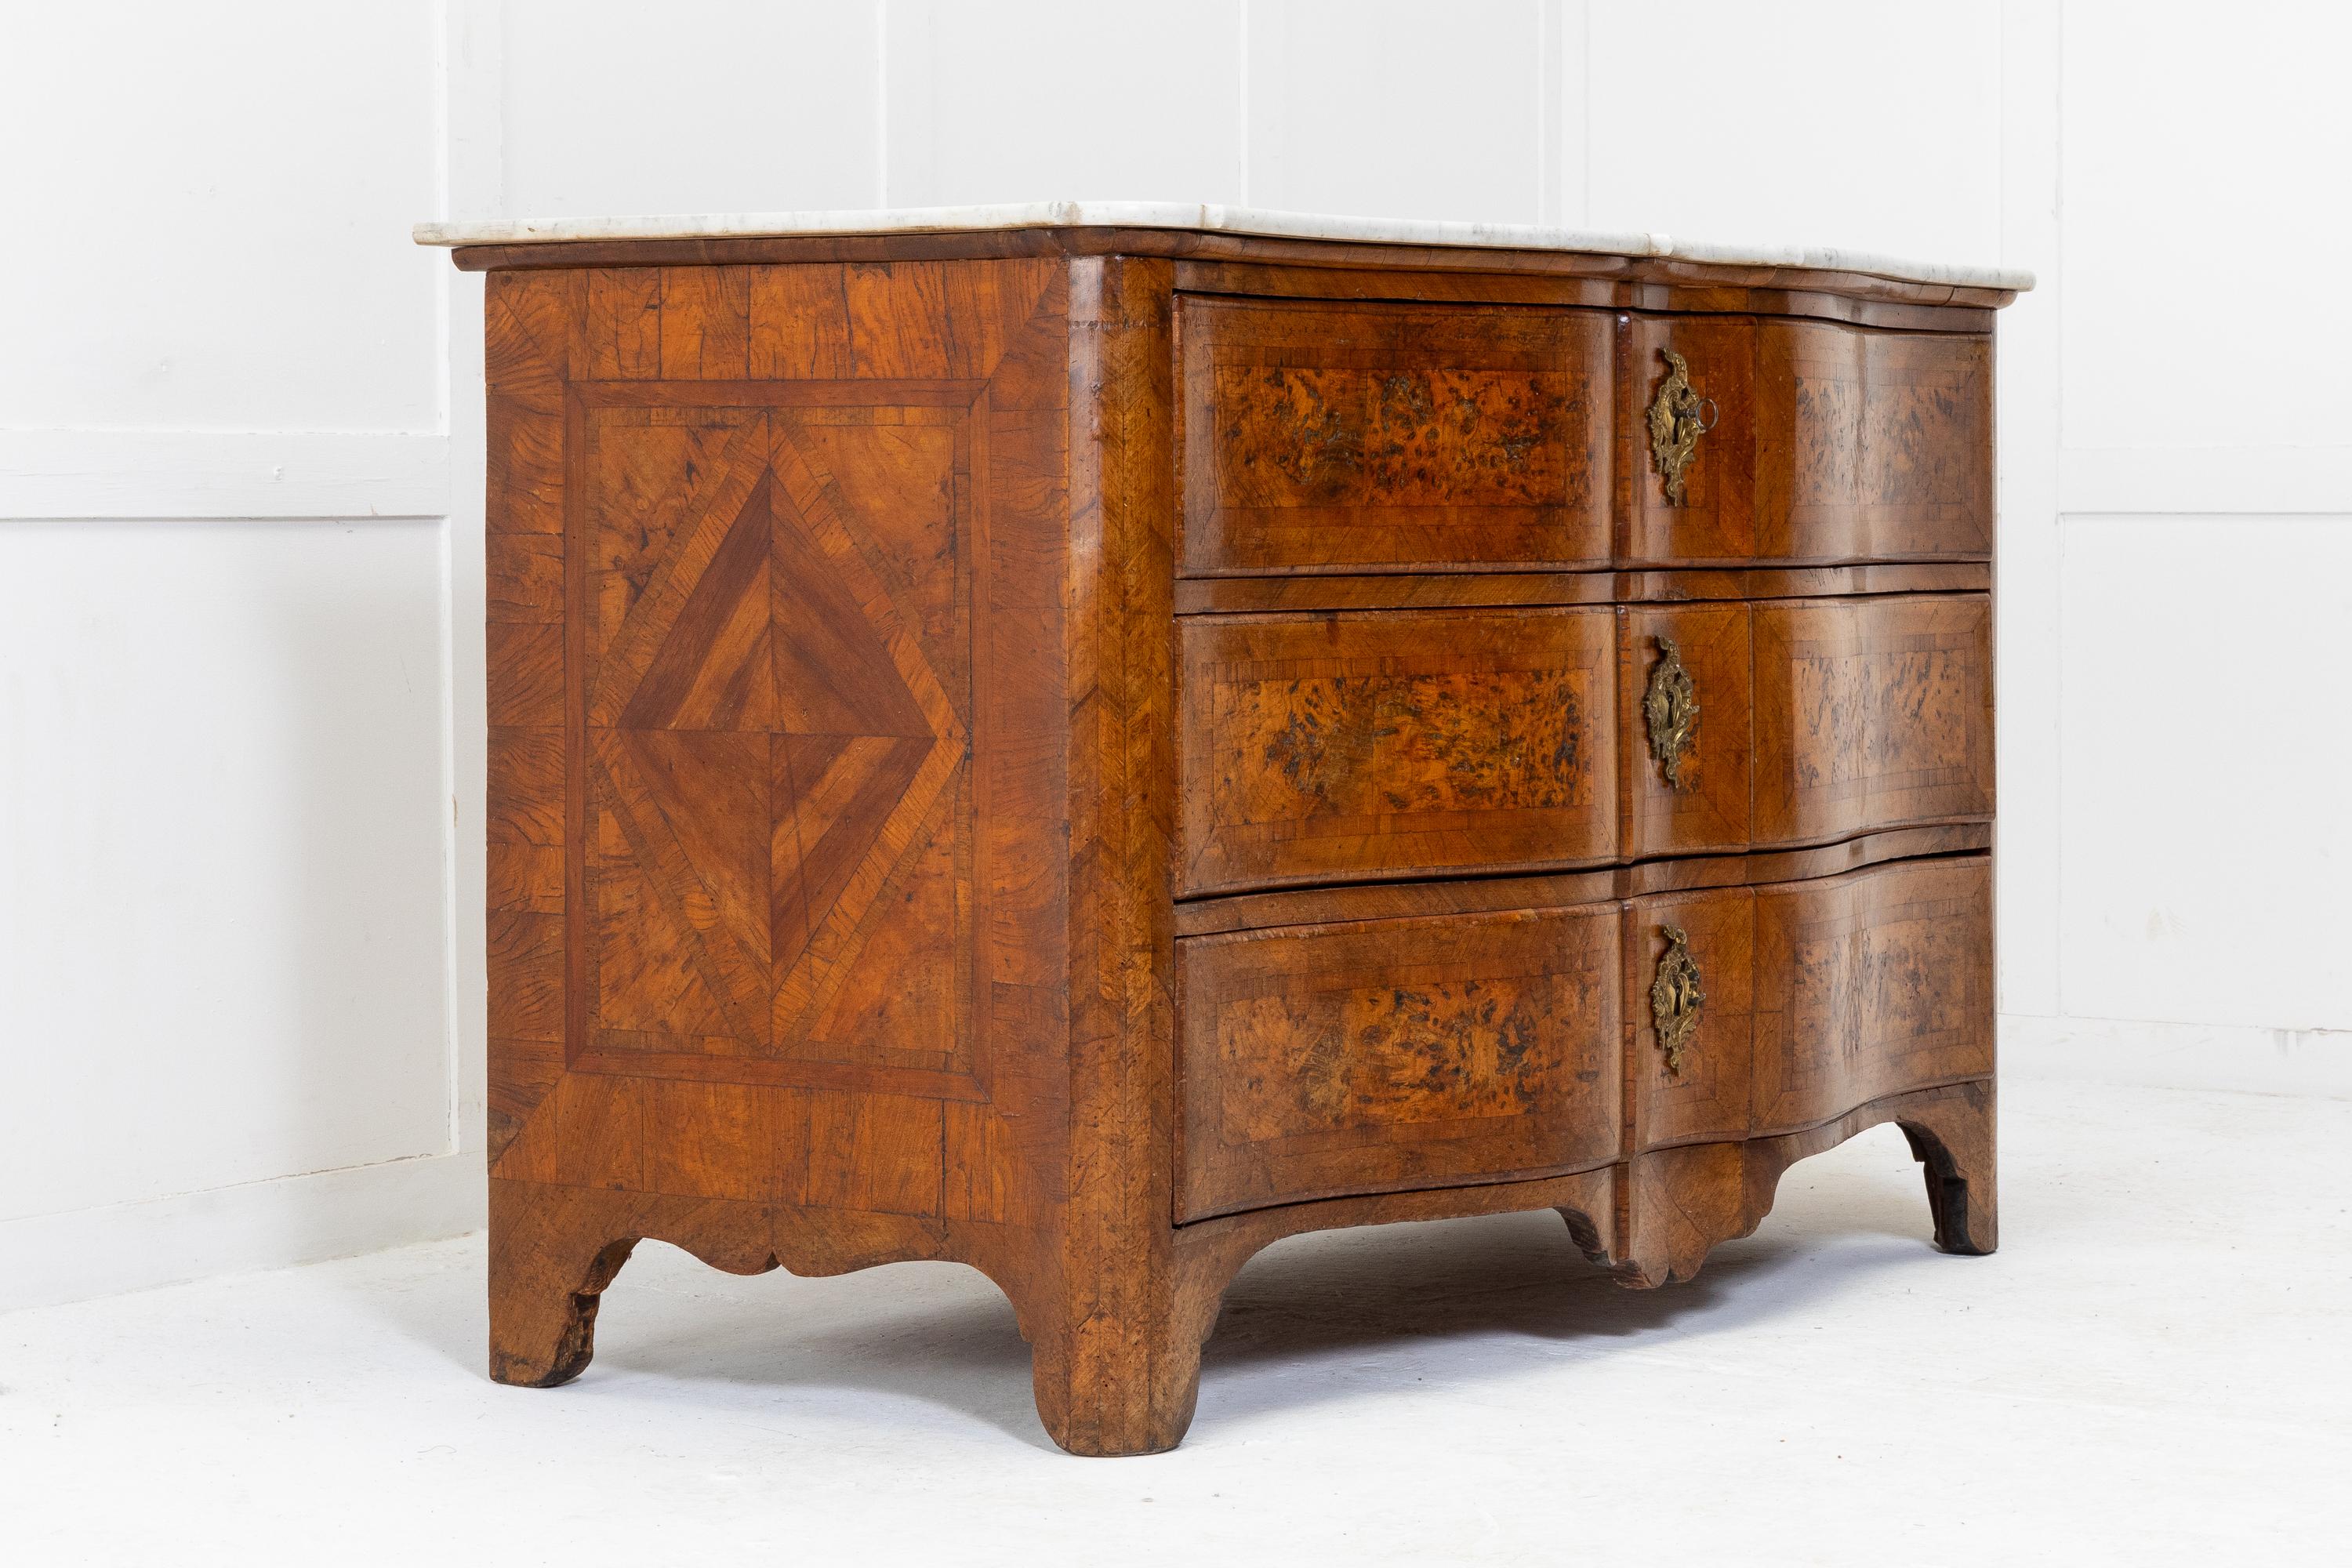 An excellent example of a maple and walnut, 18th Century serpentine fronted commode with a later marble top. Having three long drawers with burr maple panels and walnut crossbanding and central escutcheons. The sides are quarter veneered and